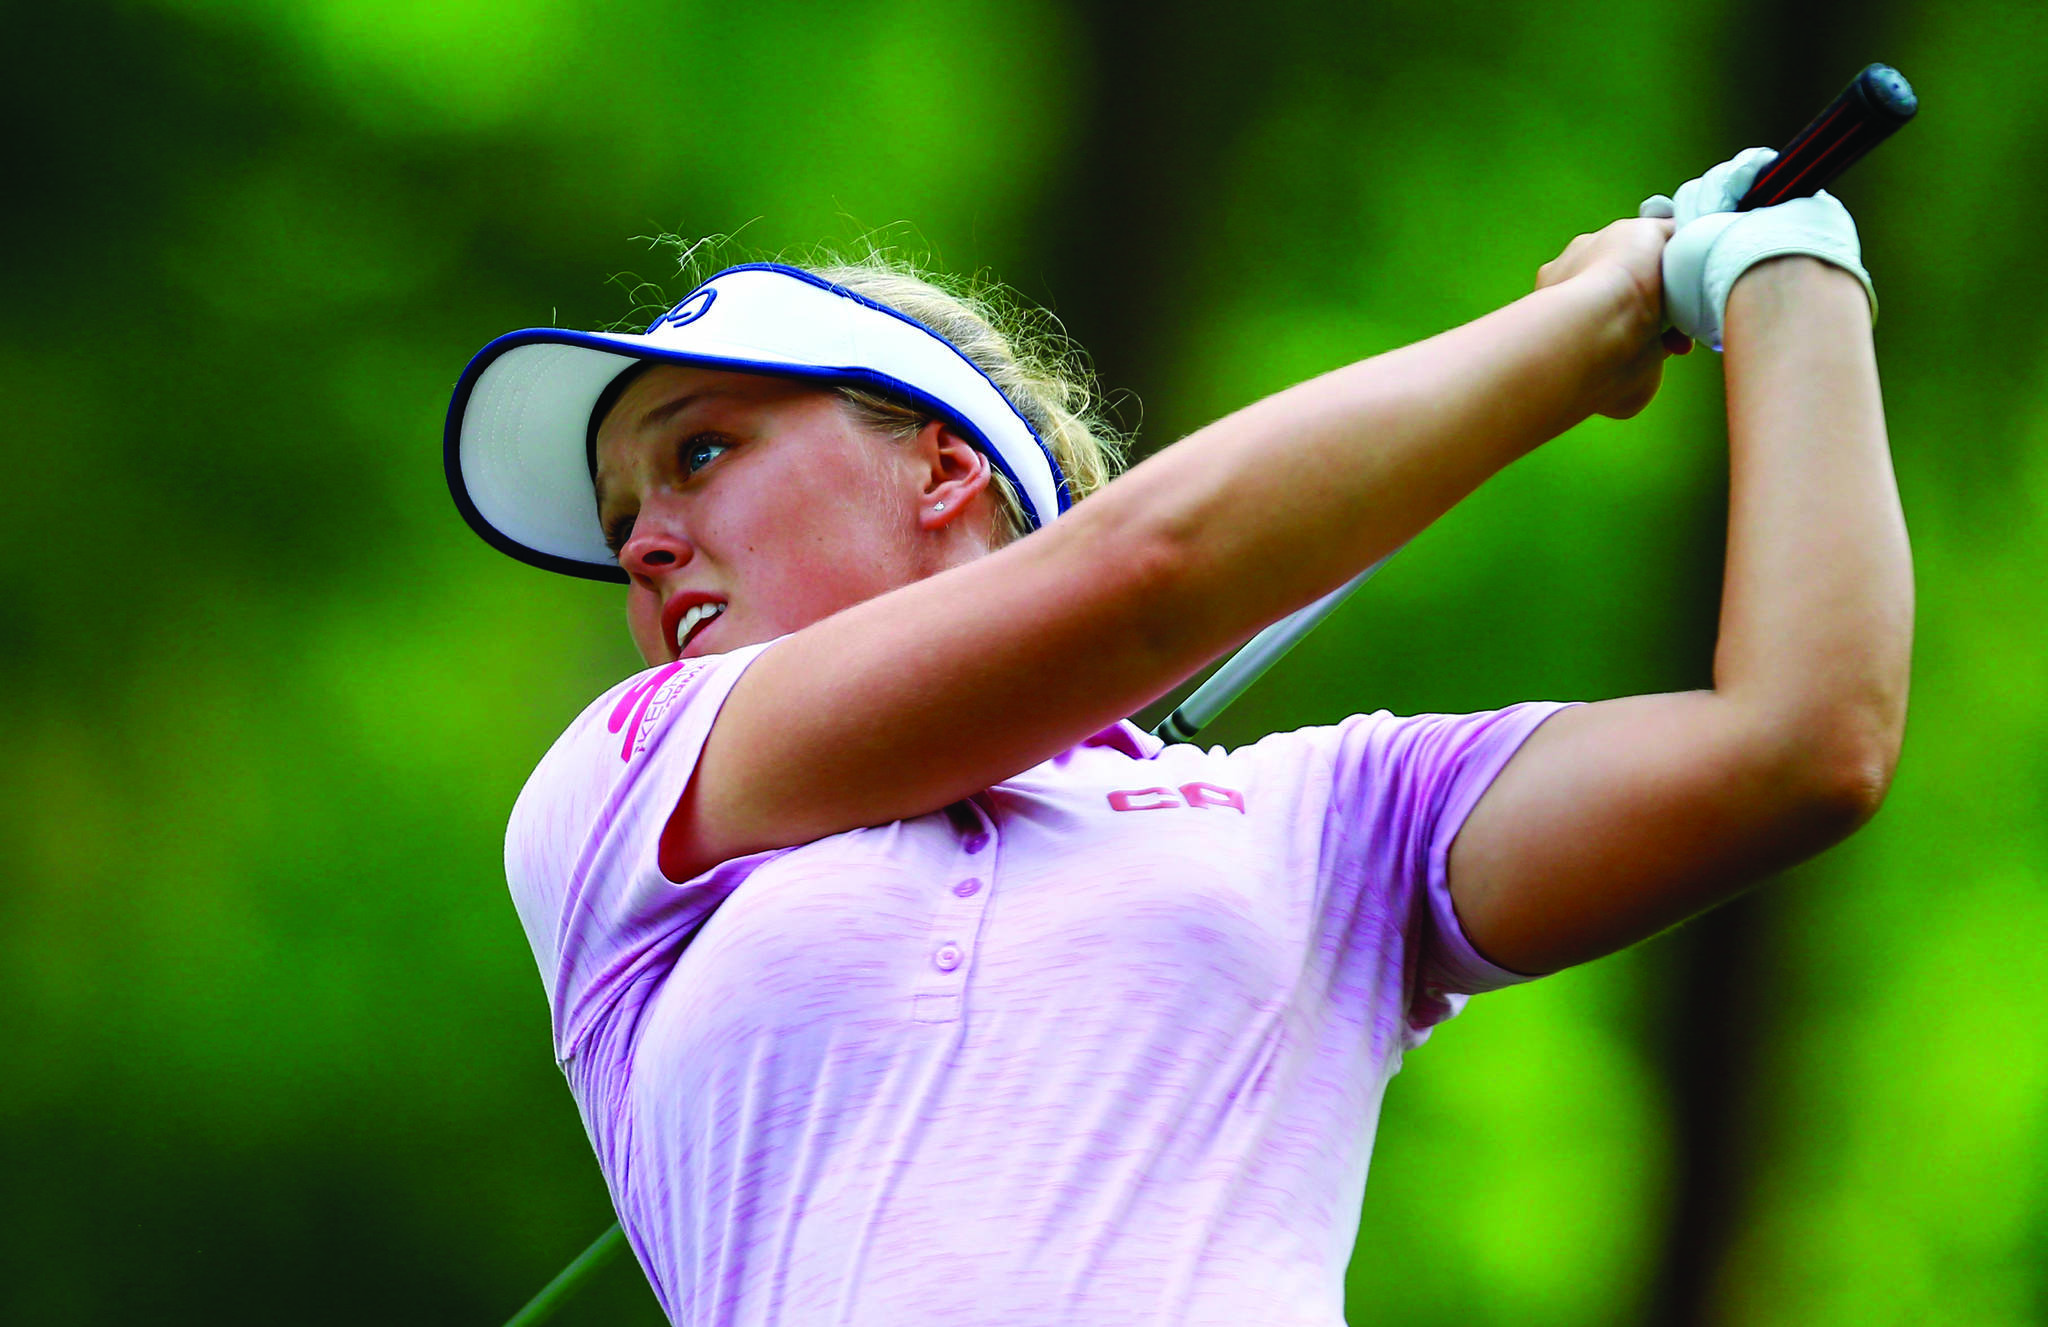 Brooke Henderson, of Canada, tees off on the seventh hole during the first round of the U.S. Women’s Open golf tournament at Shoal Creek, Thursday, May 31, 2018, in Birmingham, Ala. Brooke withdrew from the tournament before the start of the second round for personal reasons. The LPGA tweeted Friday that the native of Smiths Falls, Ont., will be returning home to Ottawa to be with her family. (AP Photo/Butch Dill)